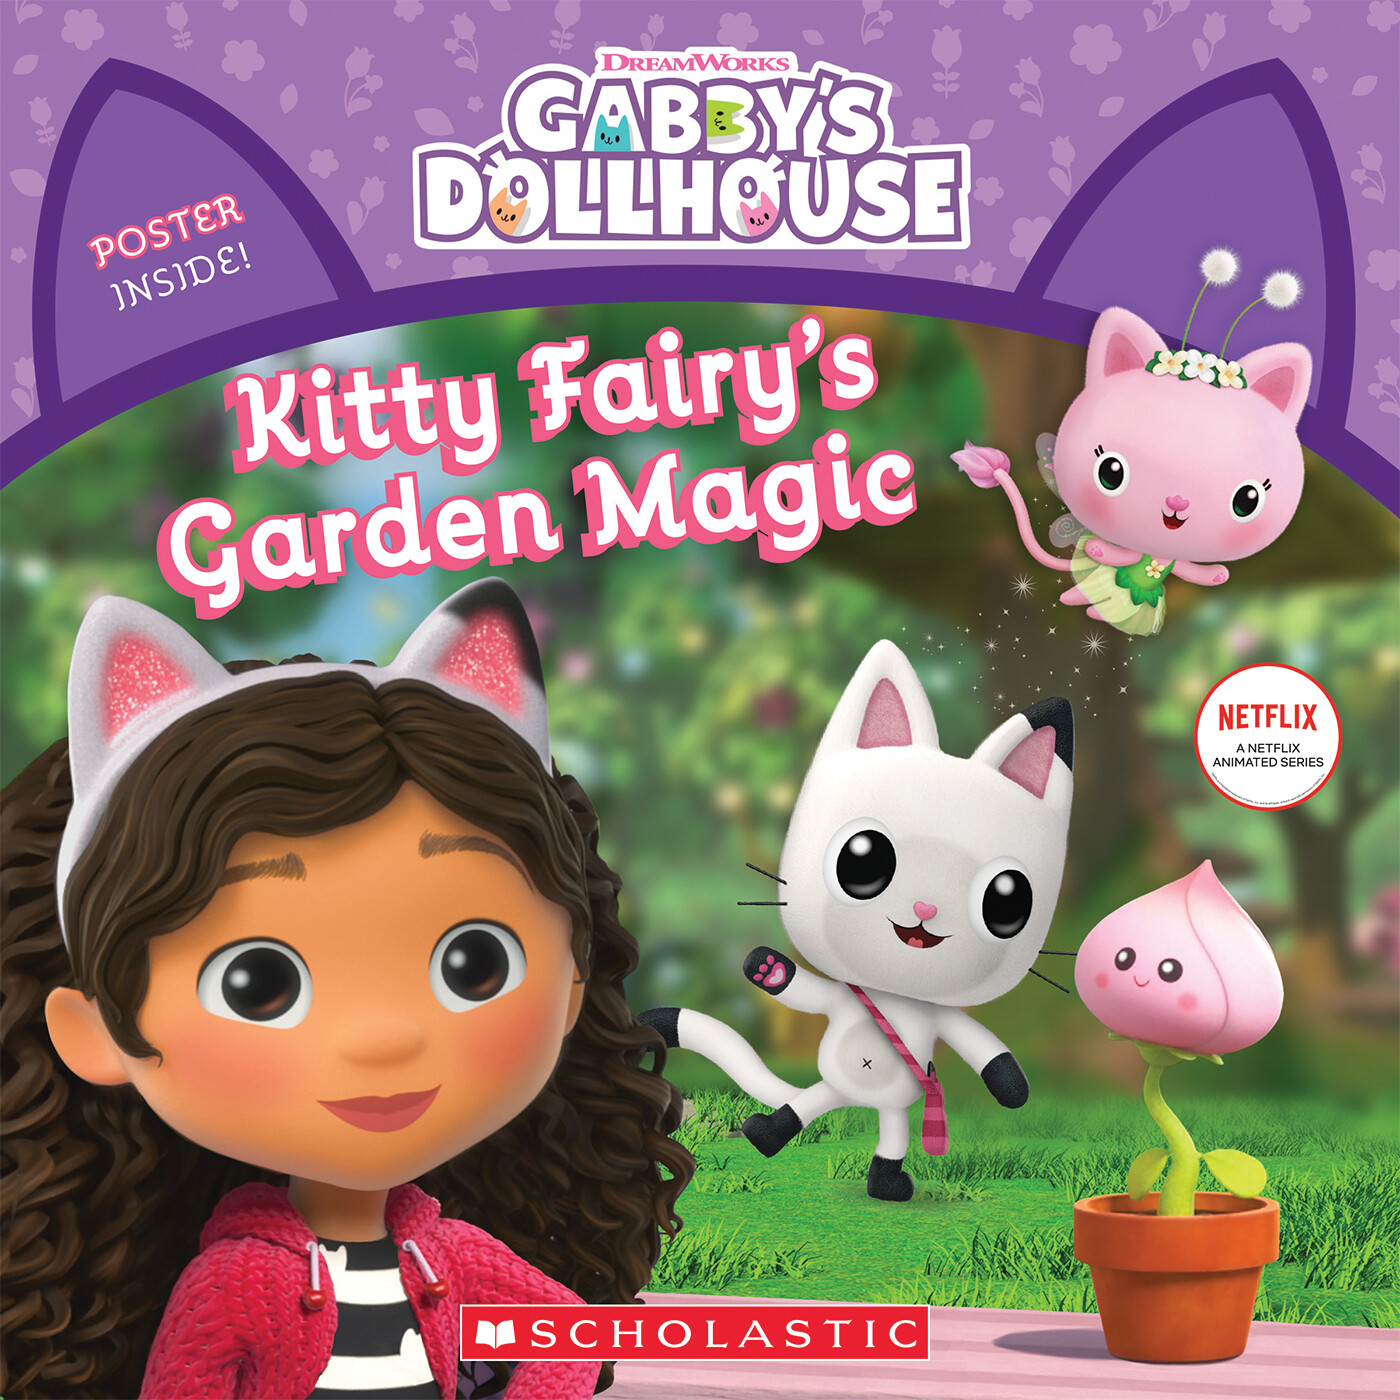 Gabby's Dollhouse #3: Kitty Fairy's Garden Magic Front Cover (Published by Scholastic Inc.)